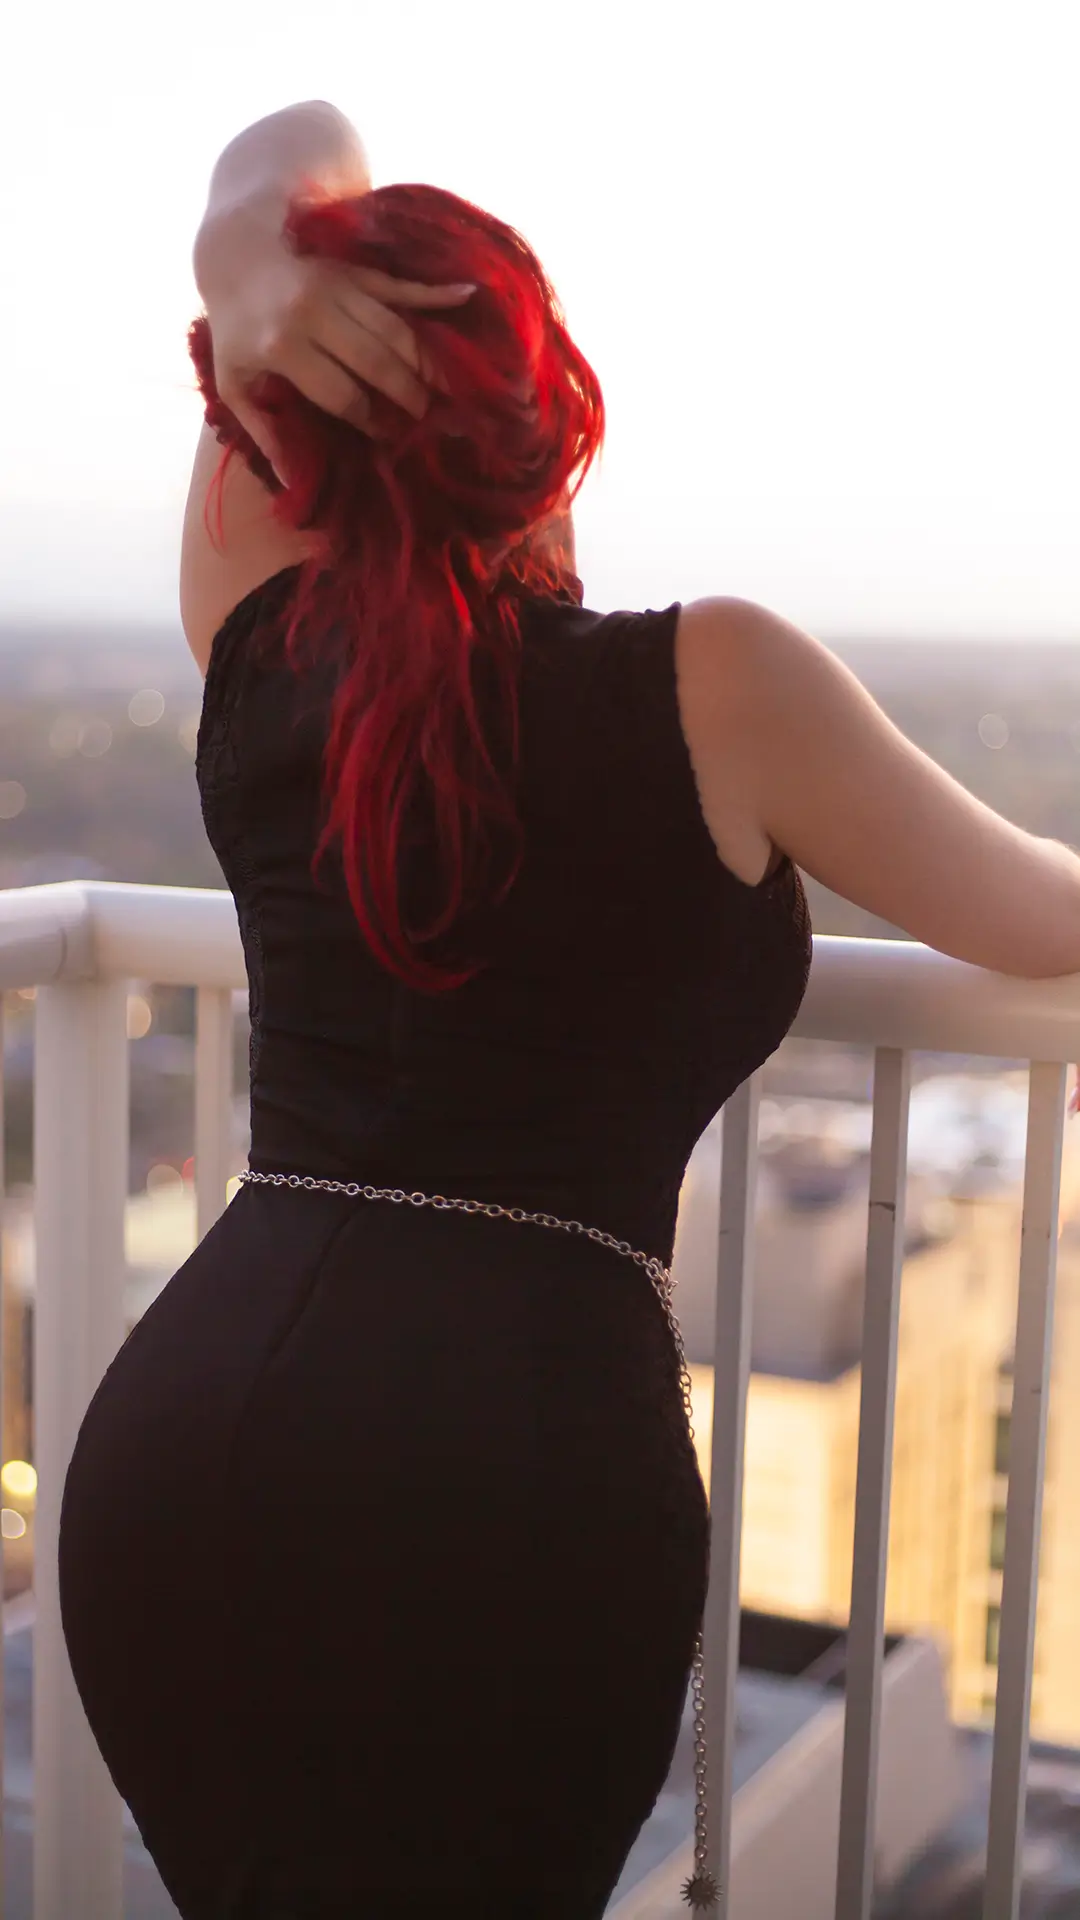 Mel Mariposa from behind in a little black dress holding up her hair